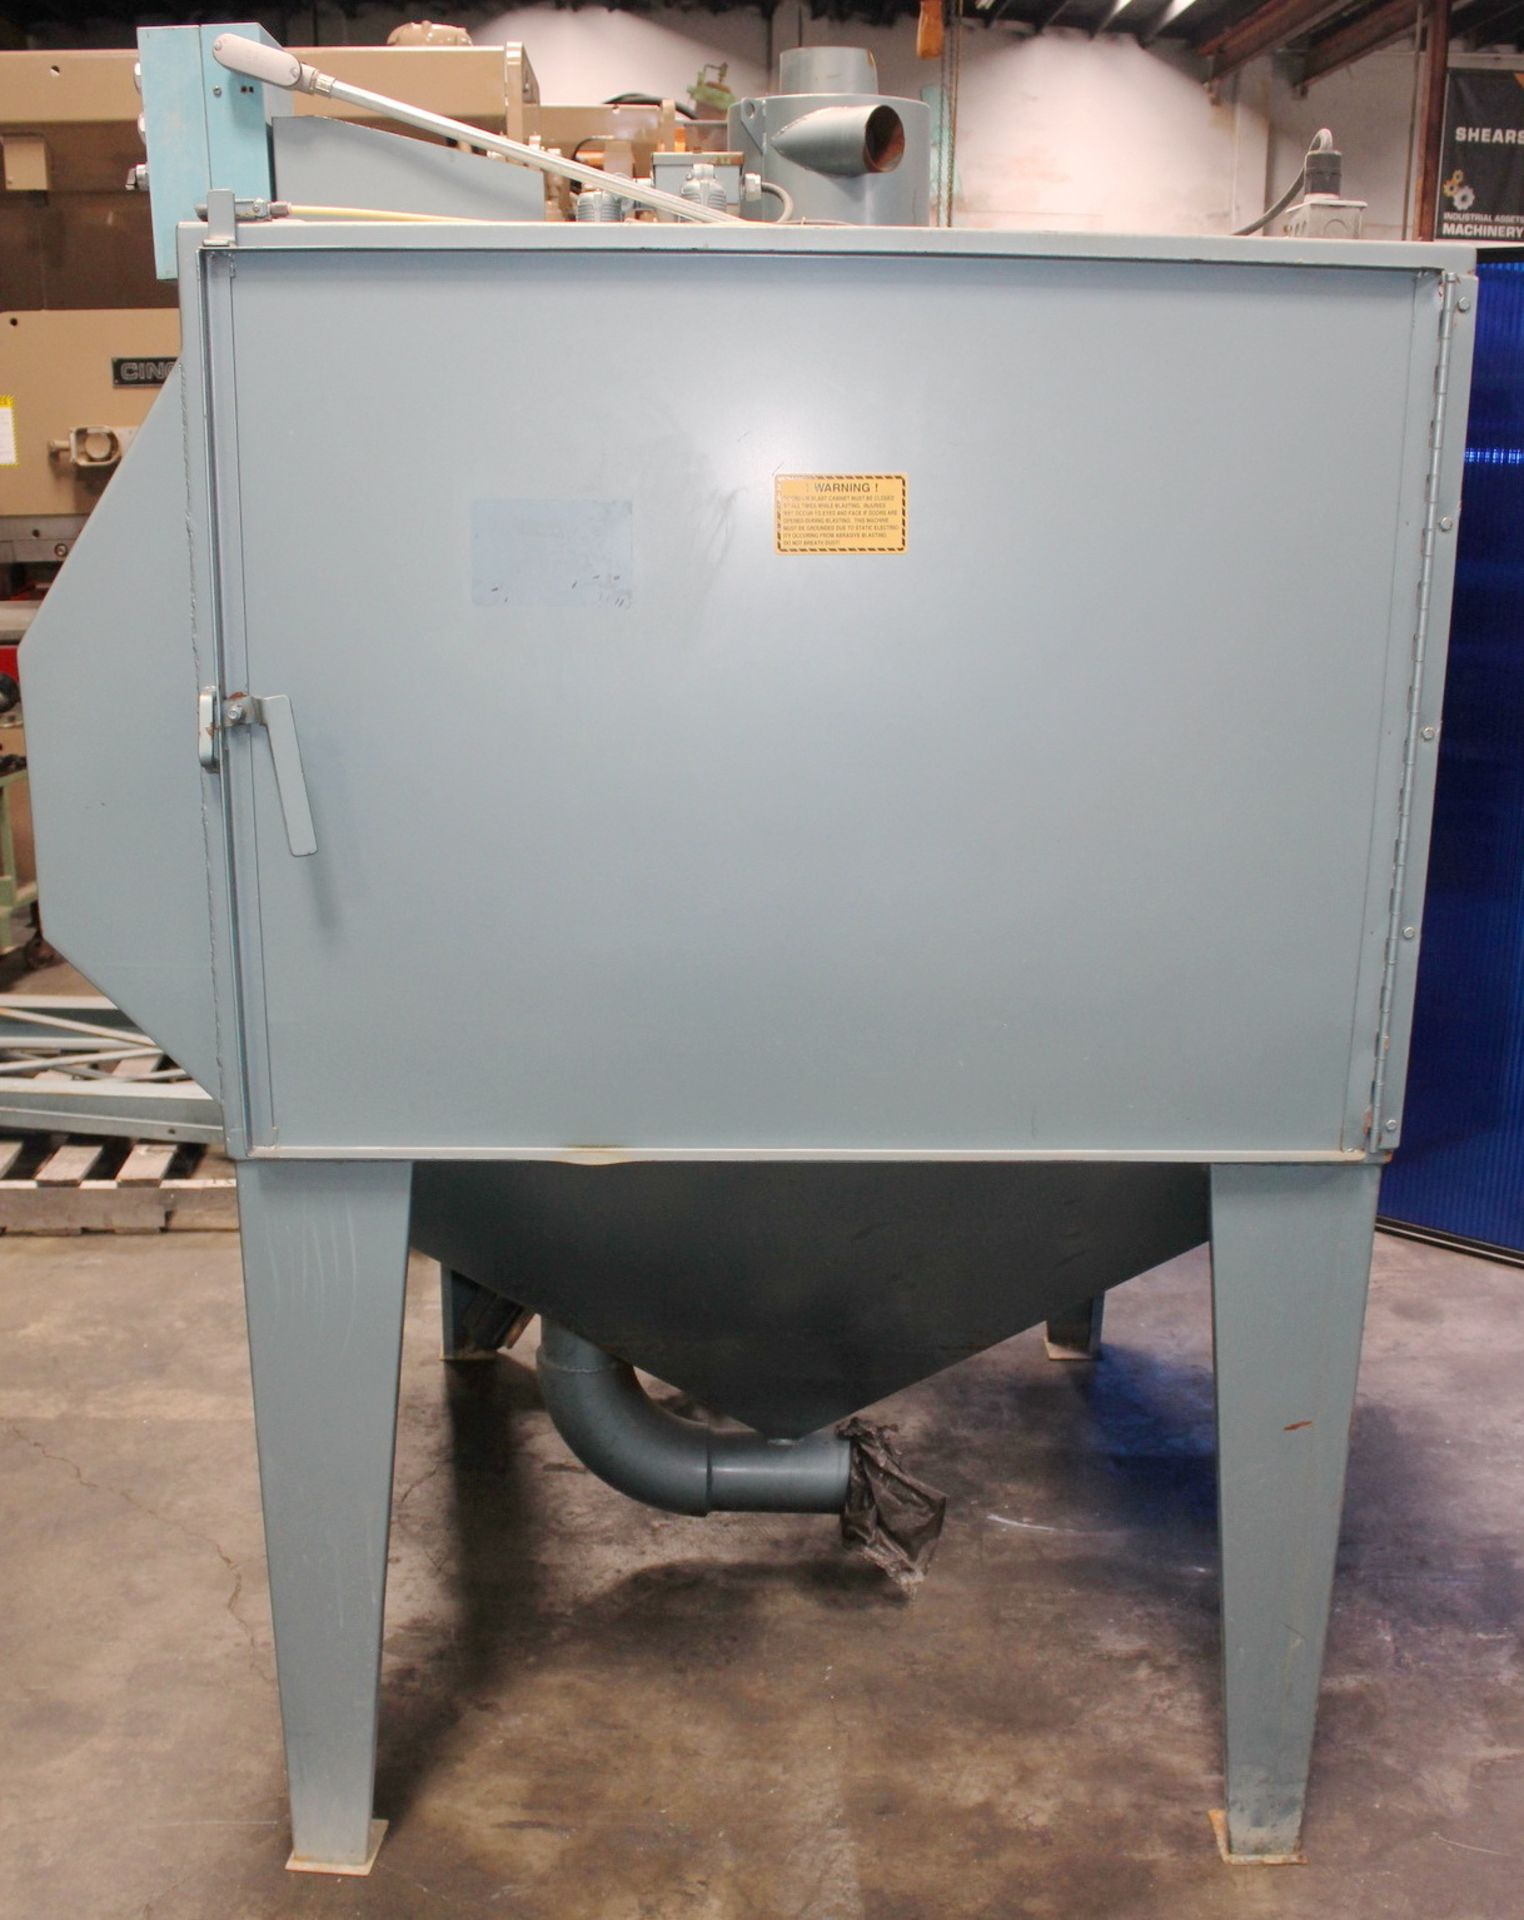 Universal Suction Type Blast Cabinet & Dust Collector | 60" x 48" x 36", Mdl: 60x48x36PDH-DC200, S/ - Image 7 of 20